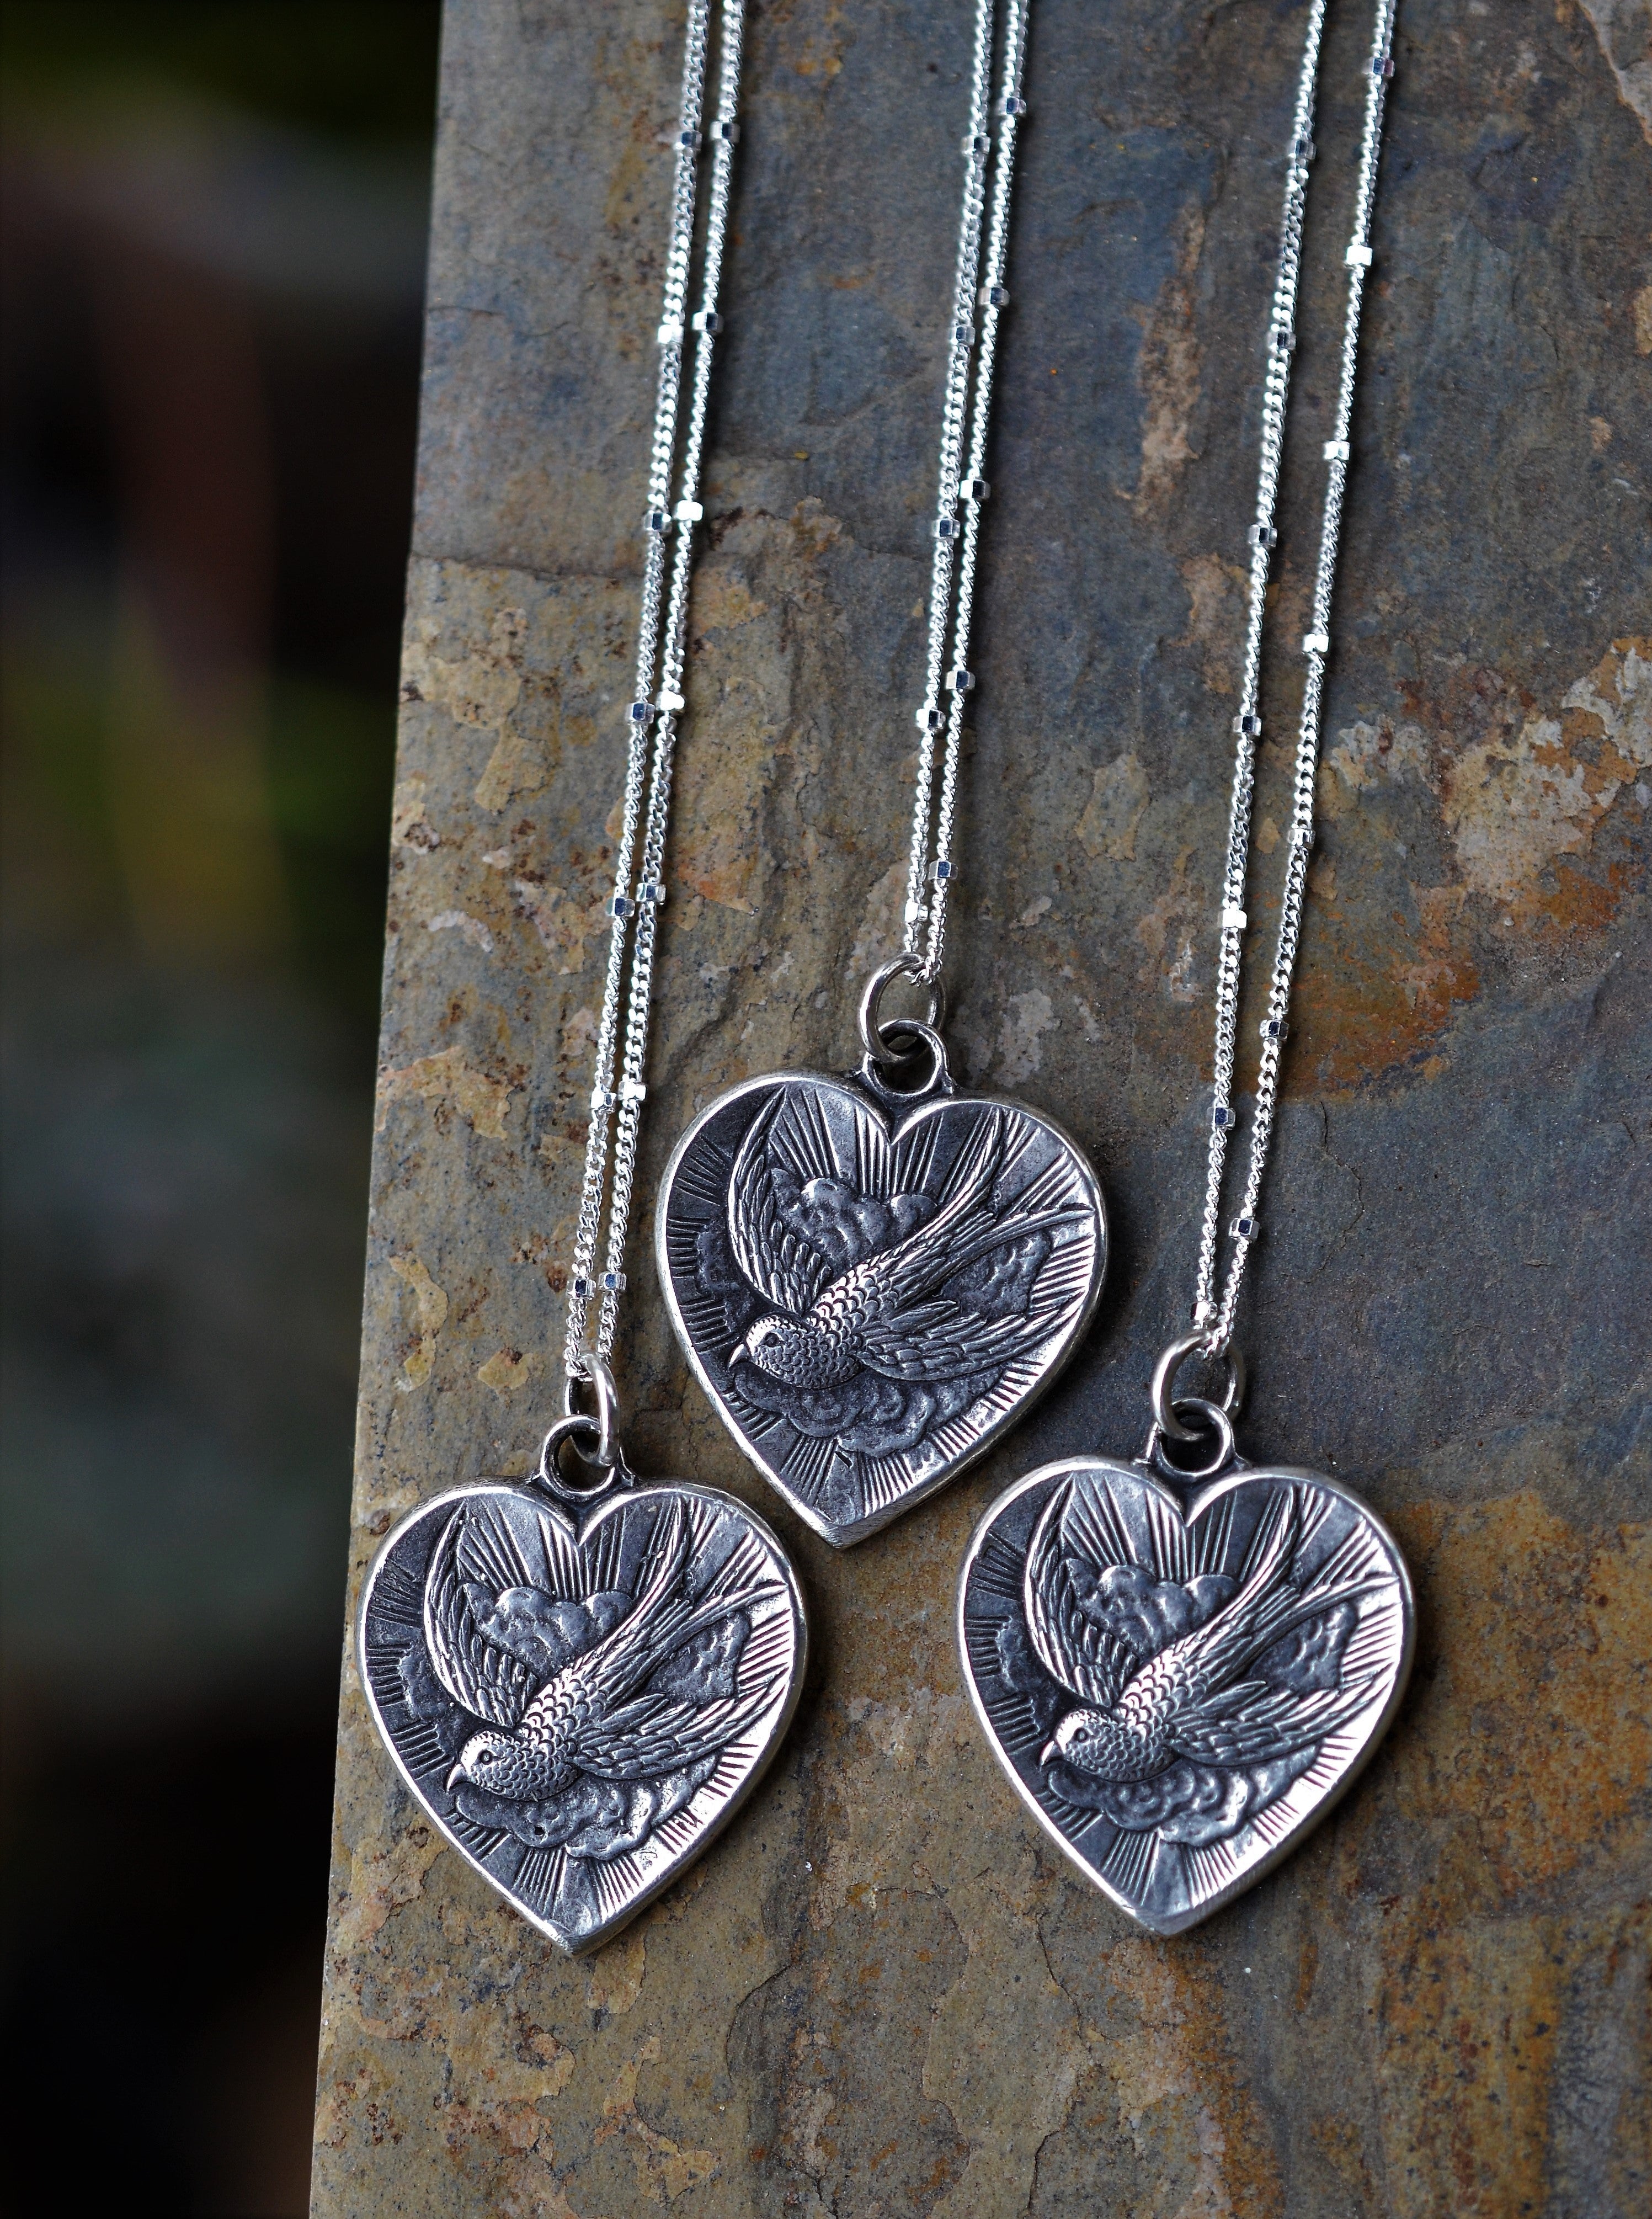 Only 3 Left! PRE-ORDER - Tattoo Heart / Swallow Pendant - Double Sided - 18" or 20" Chain Included